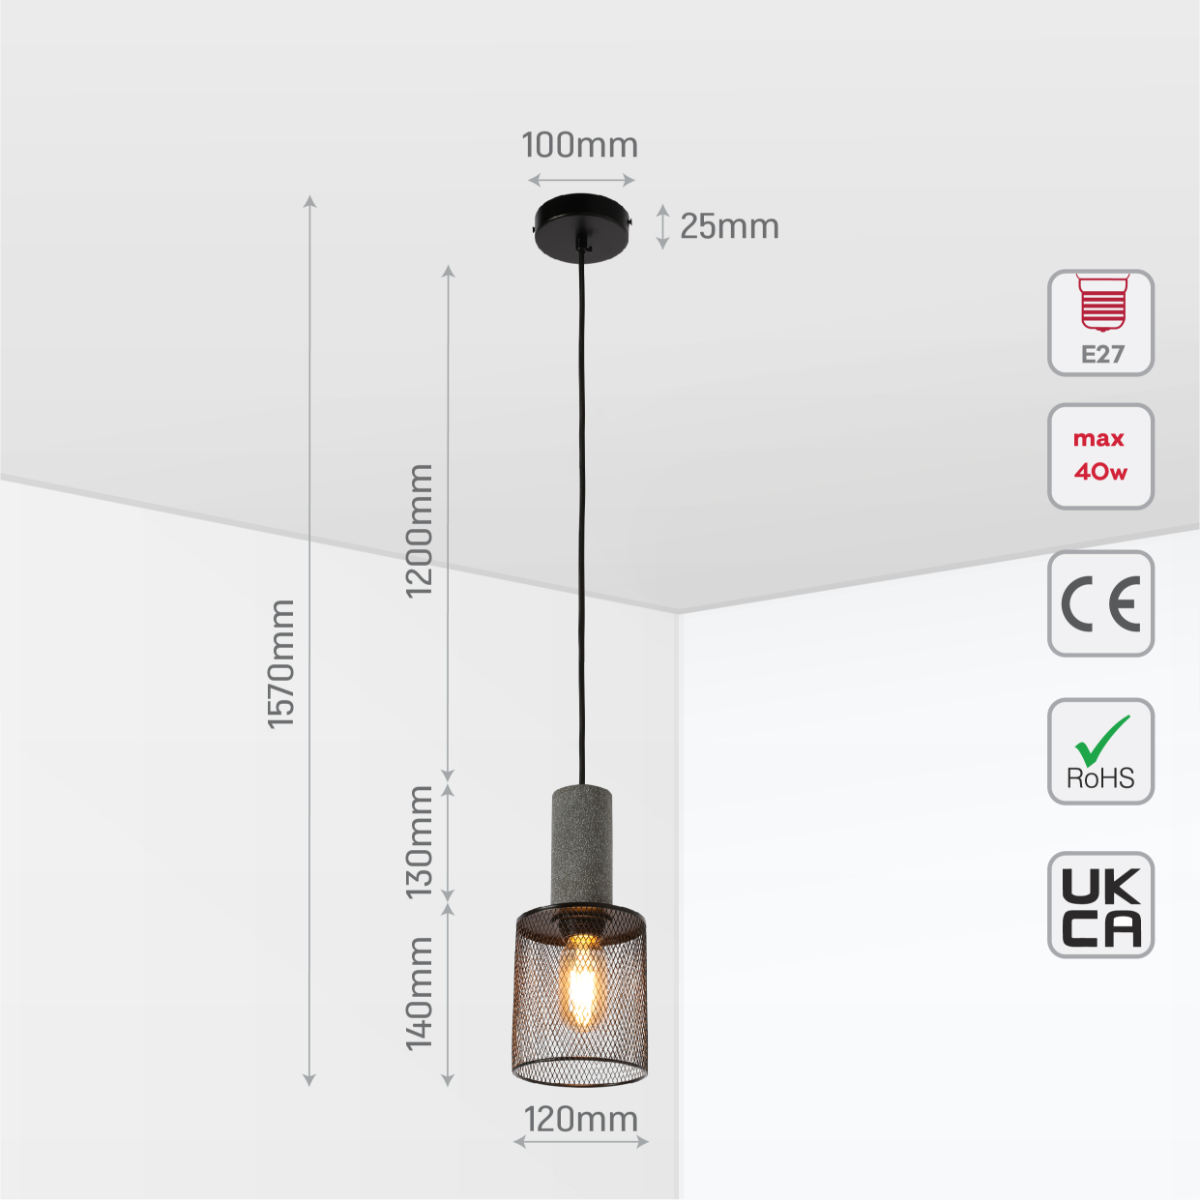 Size and certifications of Quartet of Textured Concrete Pendant Lights with Metal Shades - TEKLED 150-19056